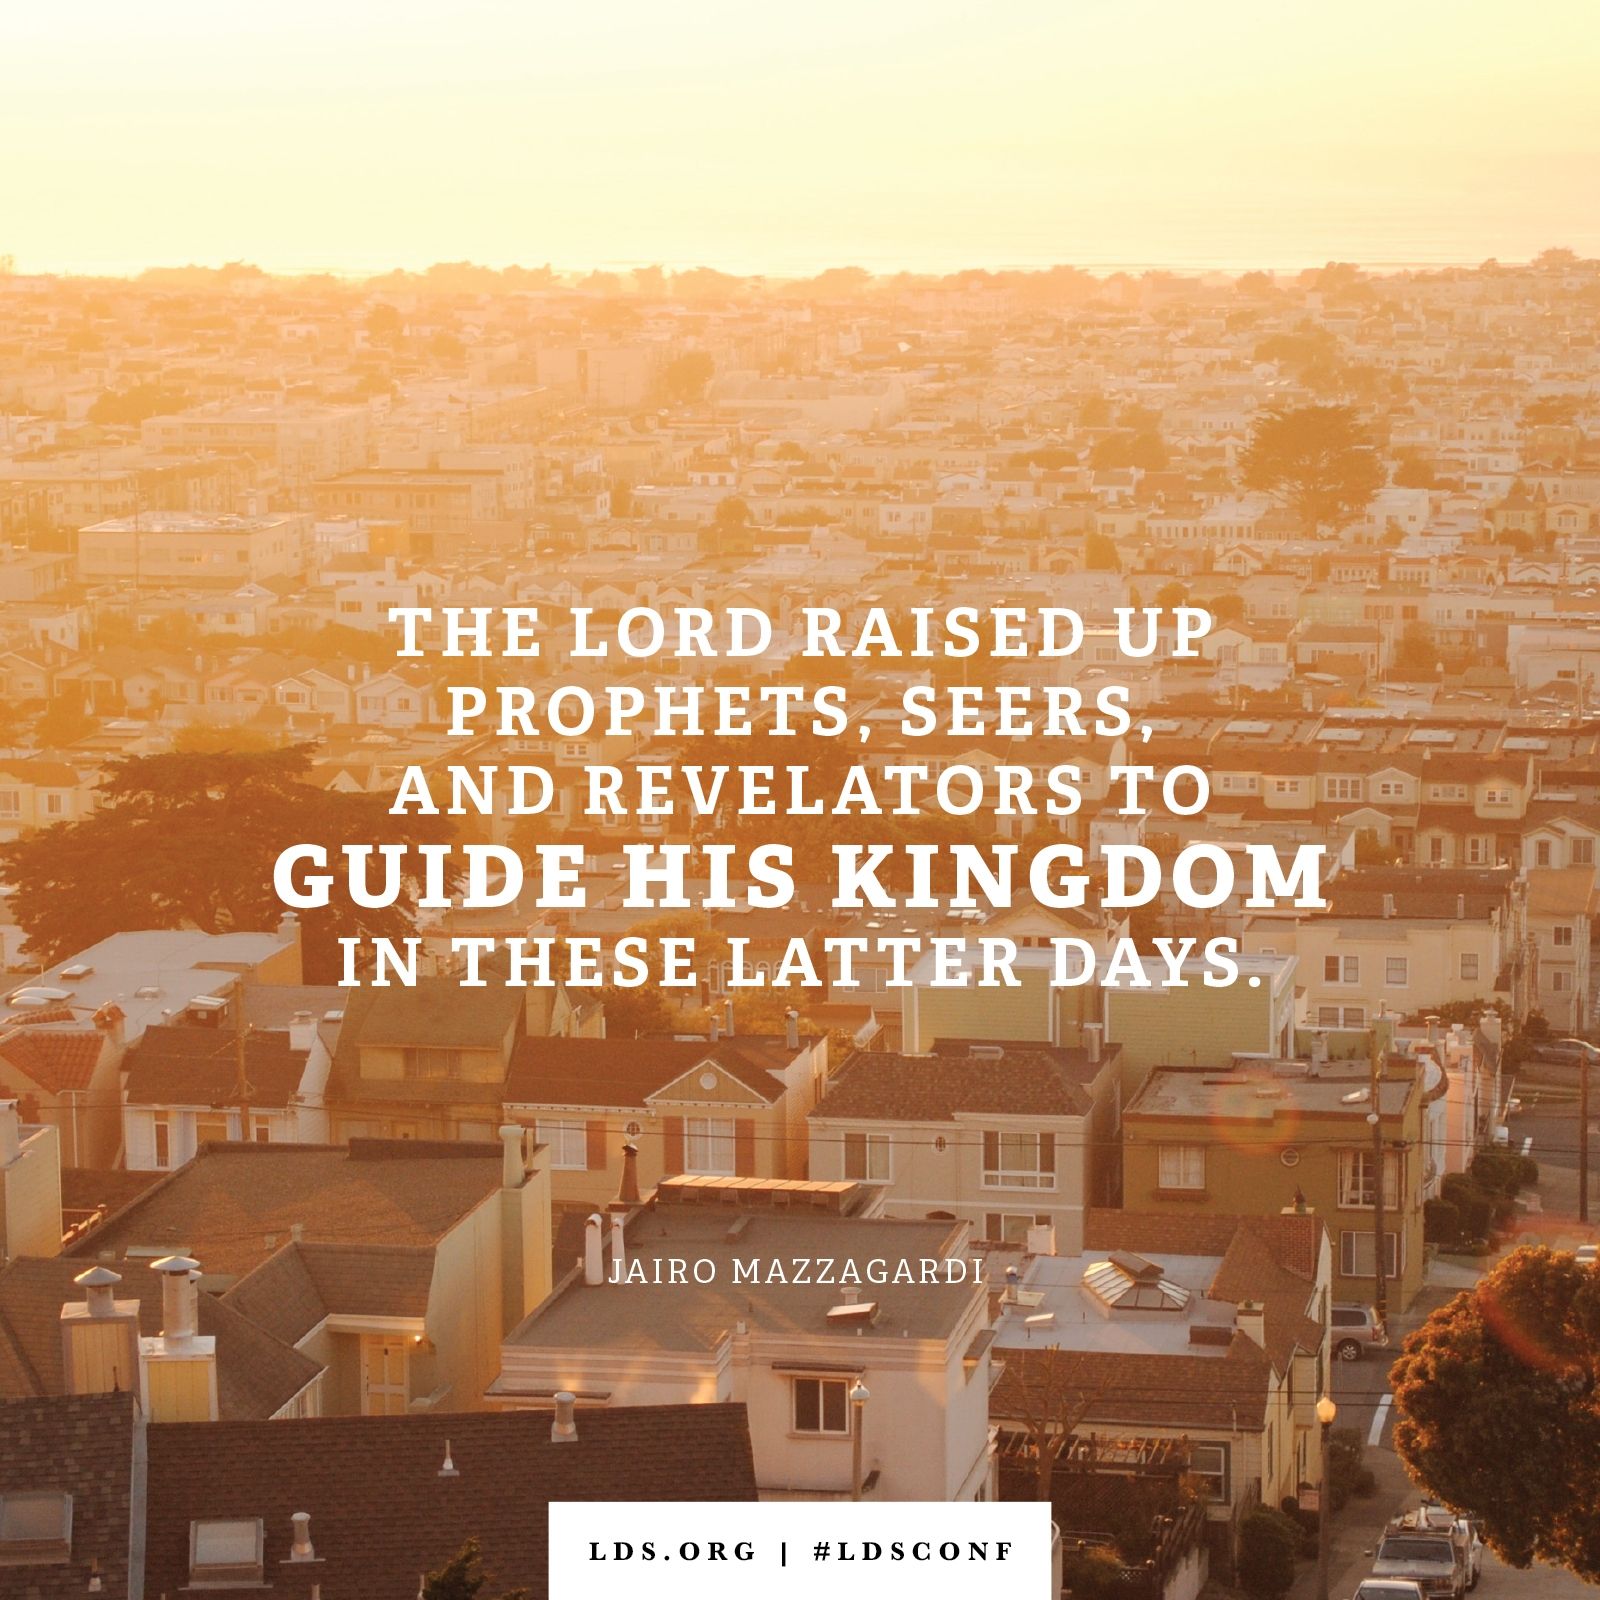 “The Lord raised up prophets, seers, and revelators to guide His kingdom in these latter days.” —Elder Jairo Mazzagardi, “The Sacred Place of Restoration”